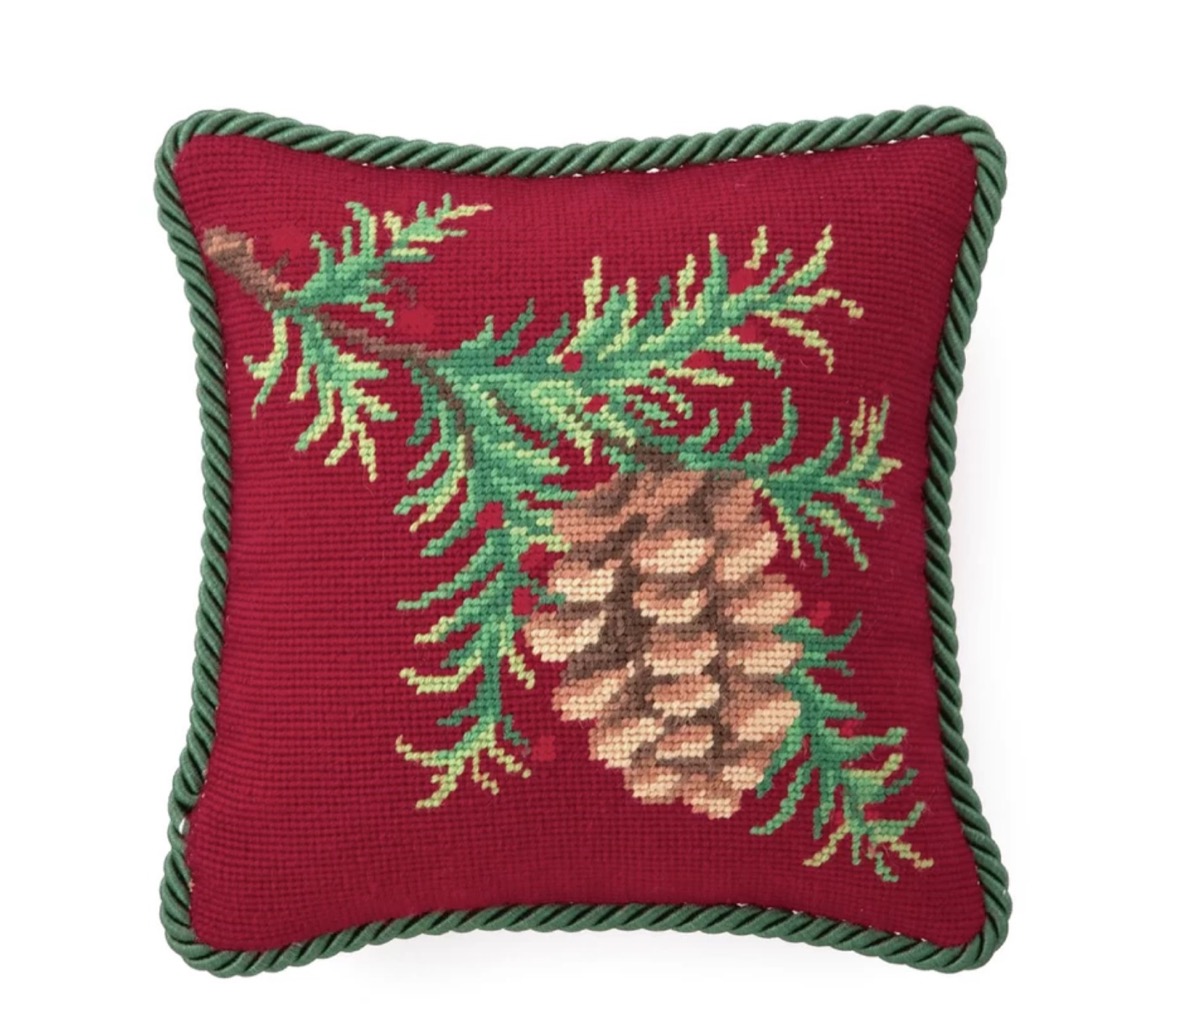 needlepoint pillow with pinecone, old fashioned home items